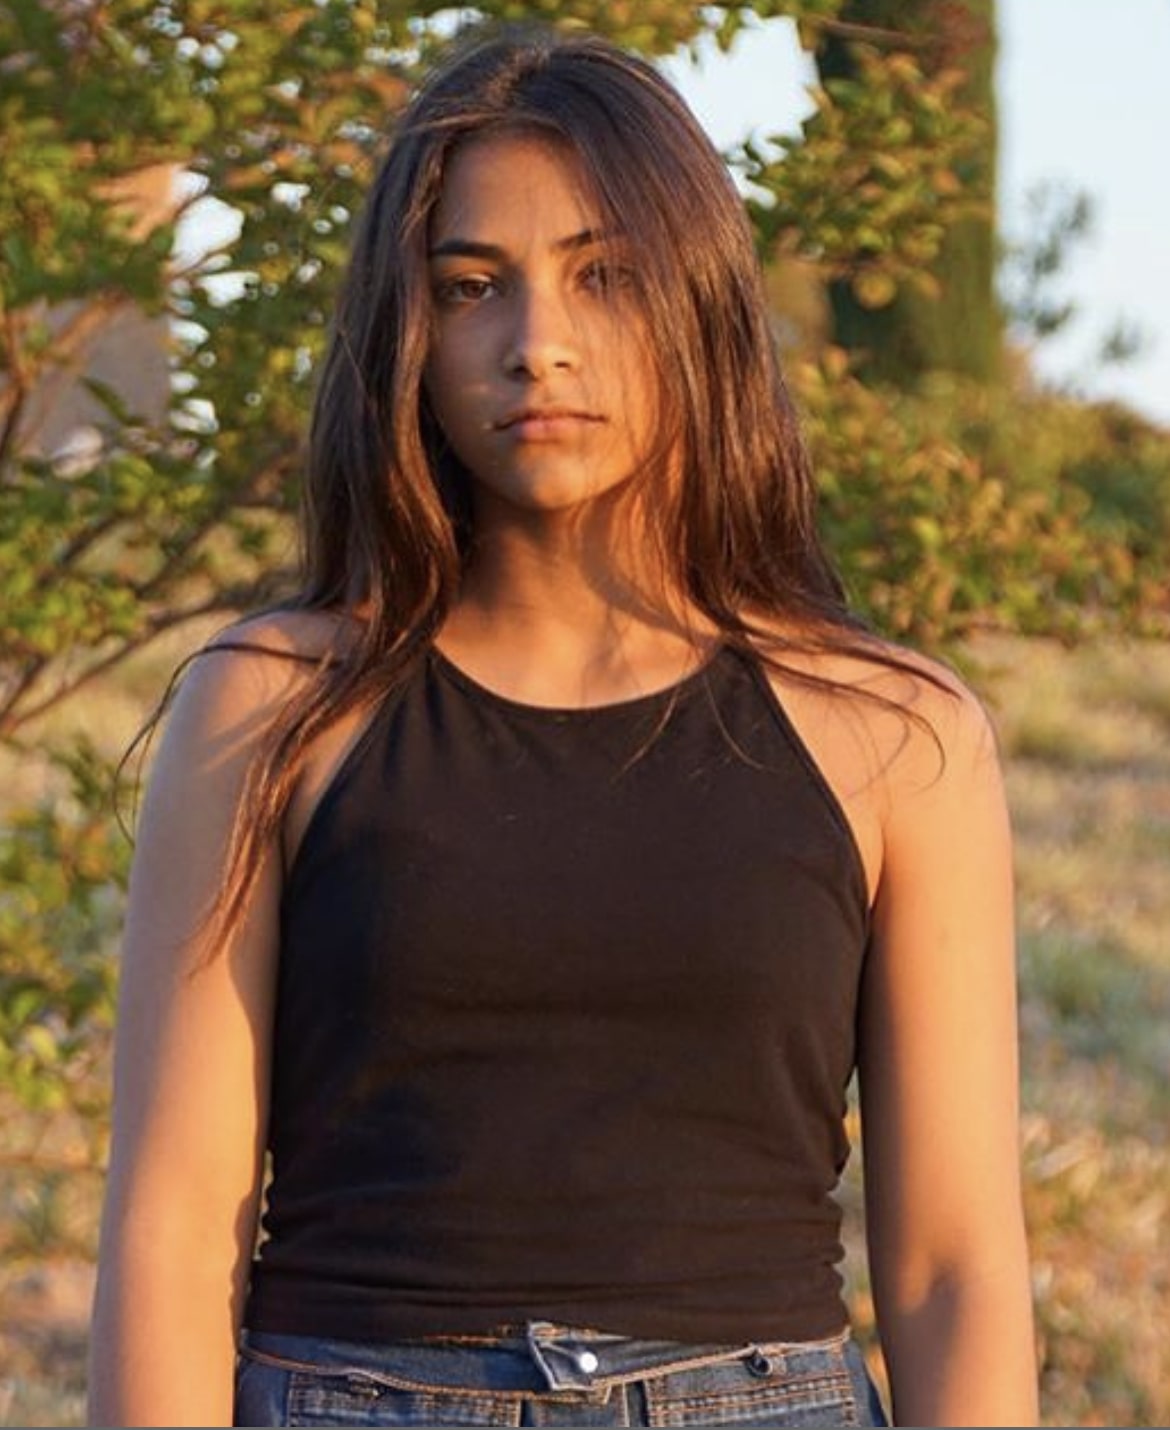 Young girl poses with serious expression in front of a landscape back drop. She wears a black halter top tank top and jeans.